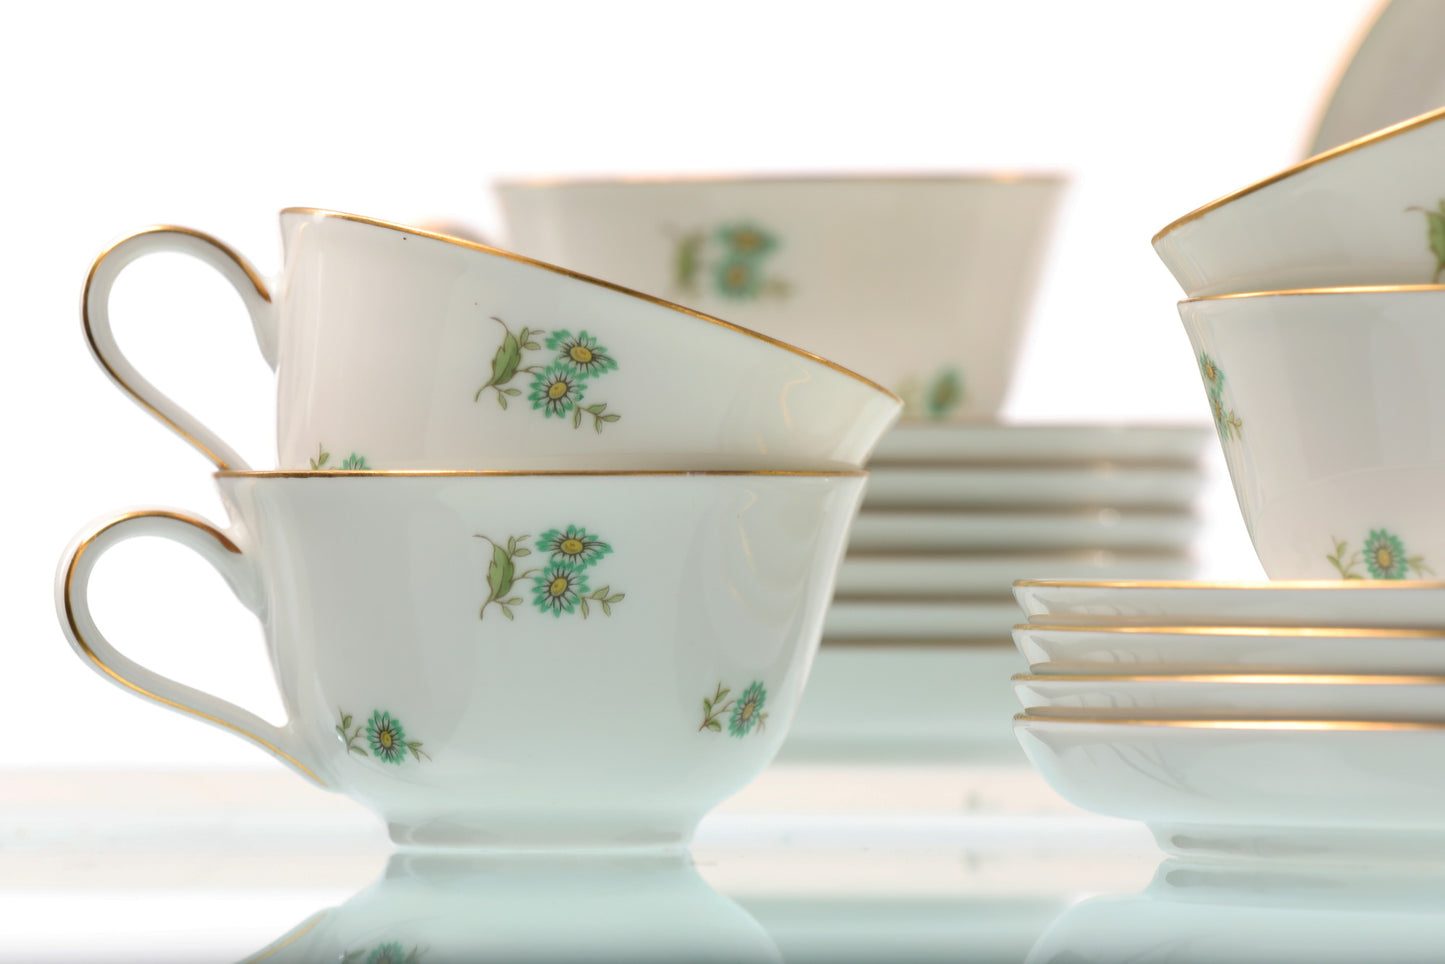 Rosenthal Helena coffee service from the 50s